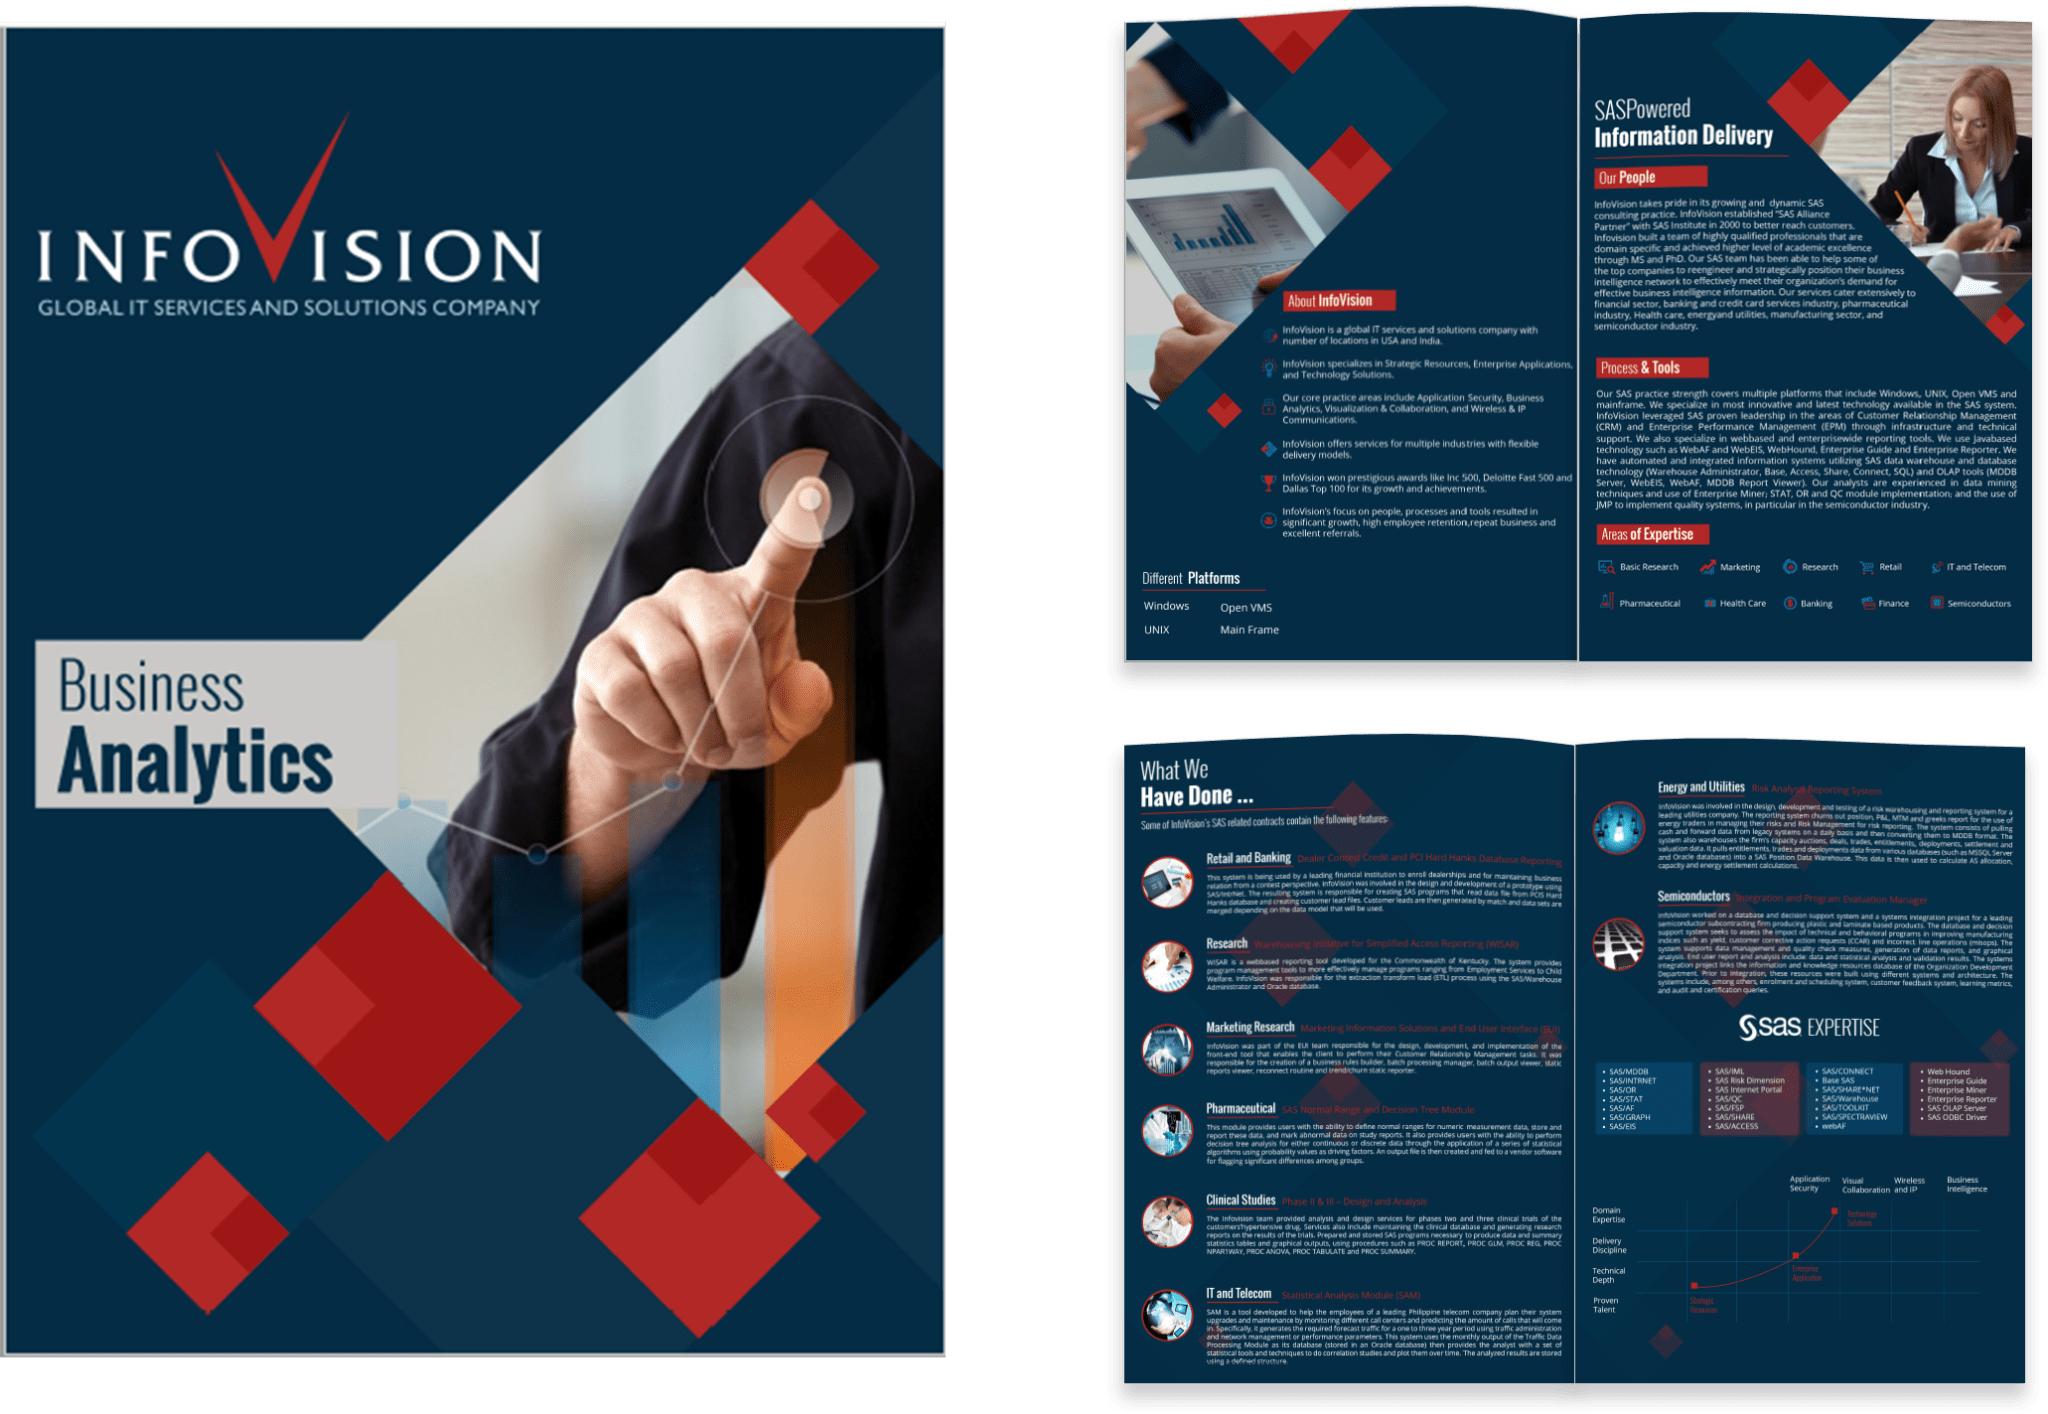 Infovision for its Business Analytics